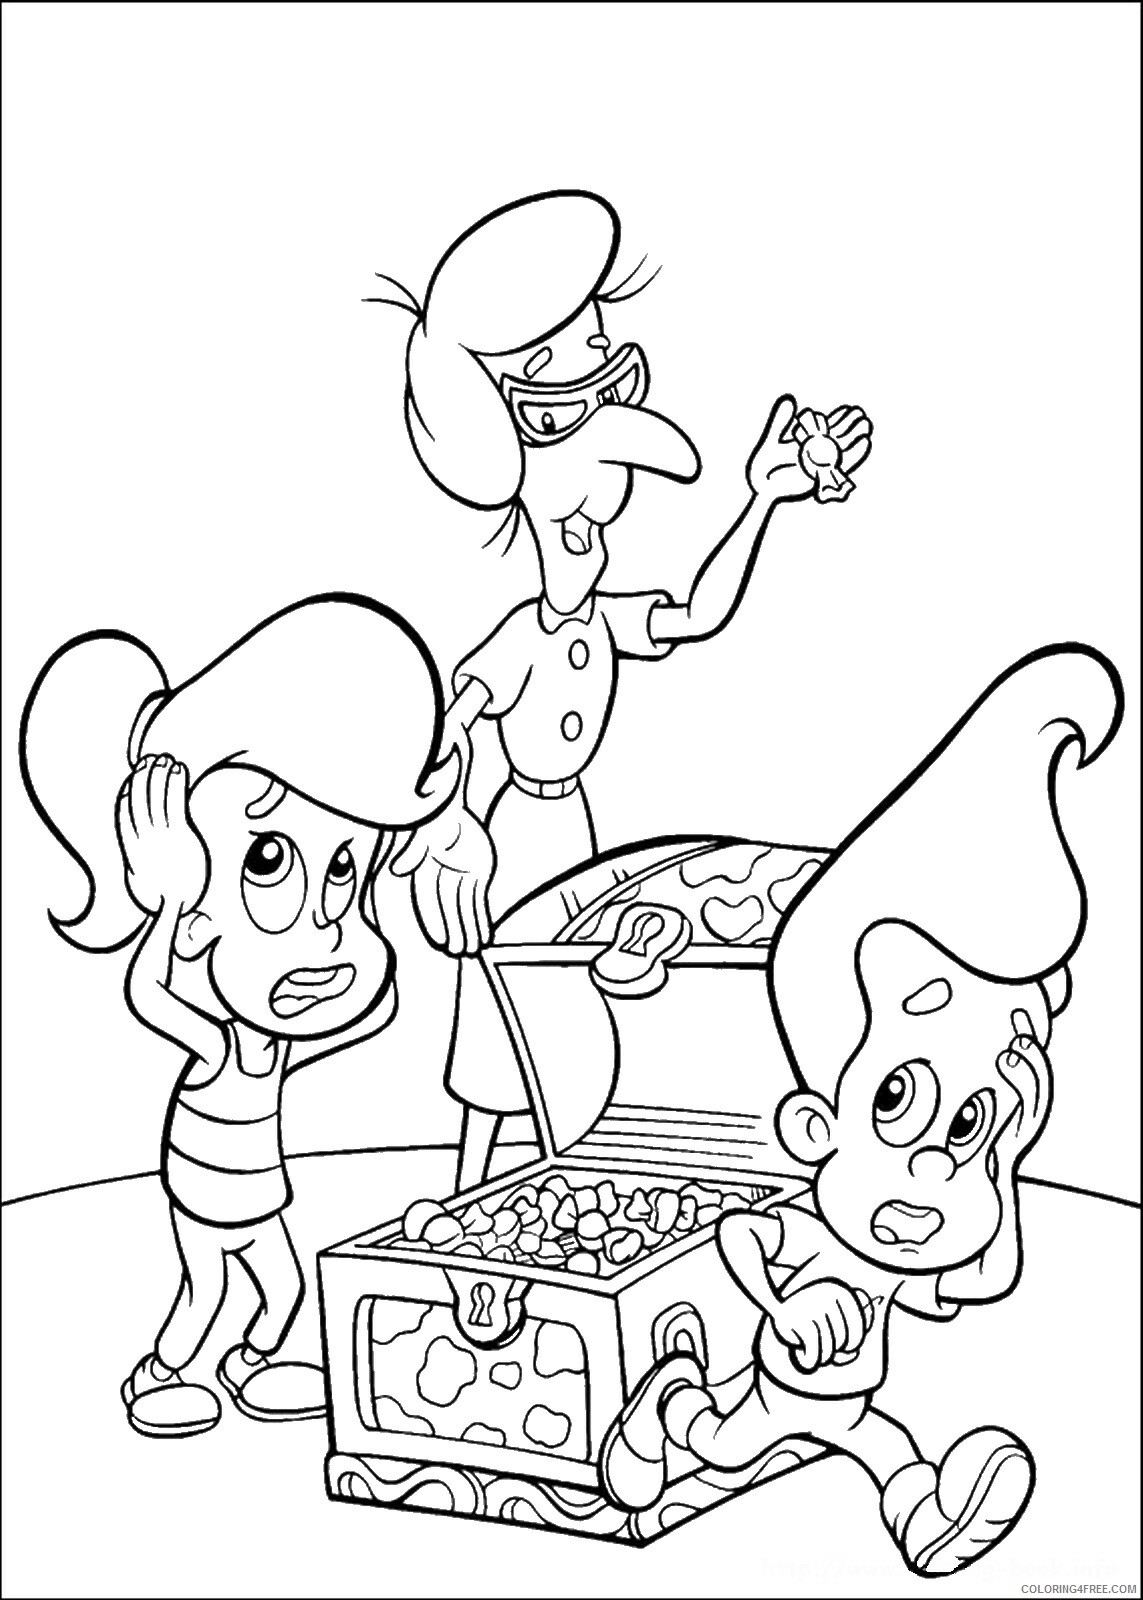 Jimmy Neutron Coloring Pages TV Film jimmy_neutron_cl16 Printable 2020 04134 Coloring4free